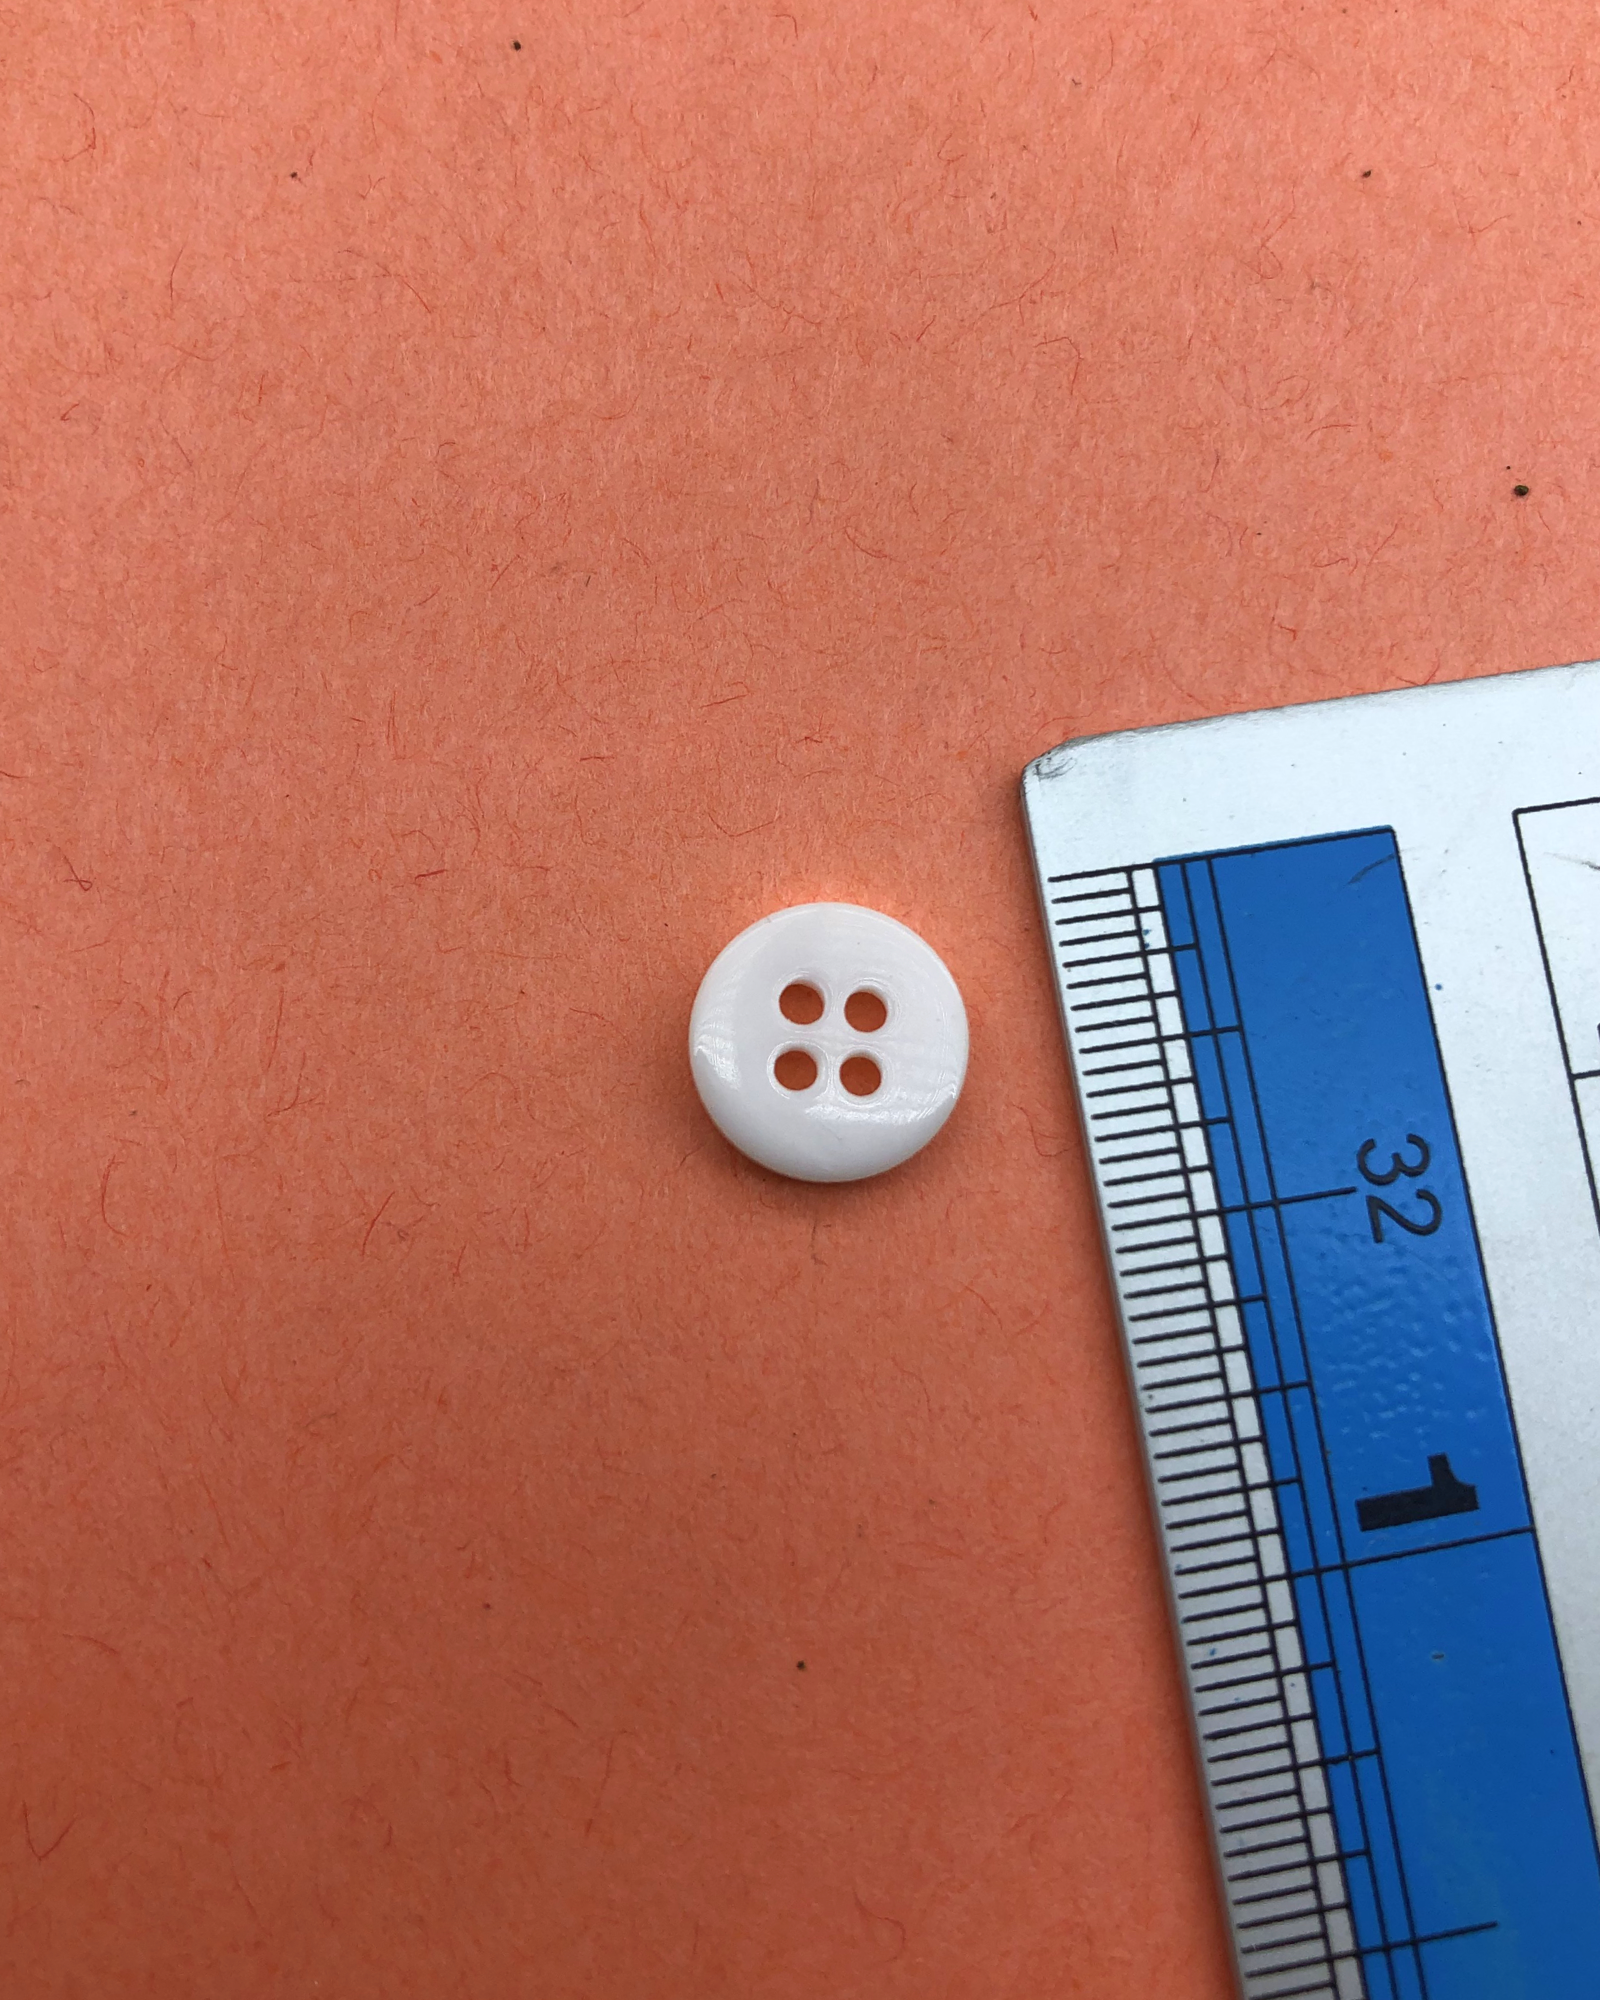 The size of the Beautifully designed 'Four Hole Plastic Button PB002' is measured by using a ruler